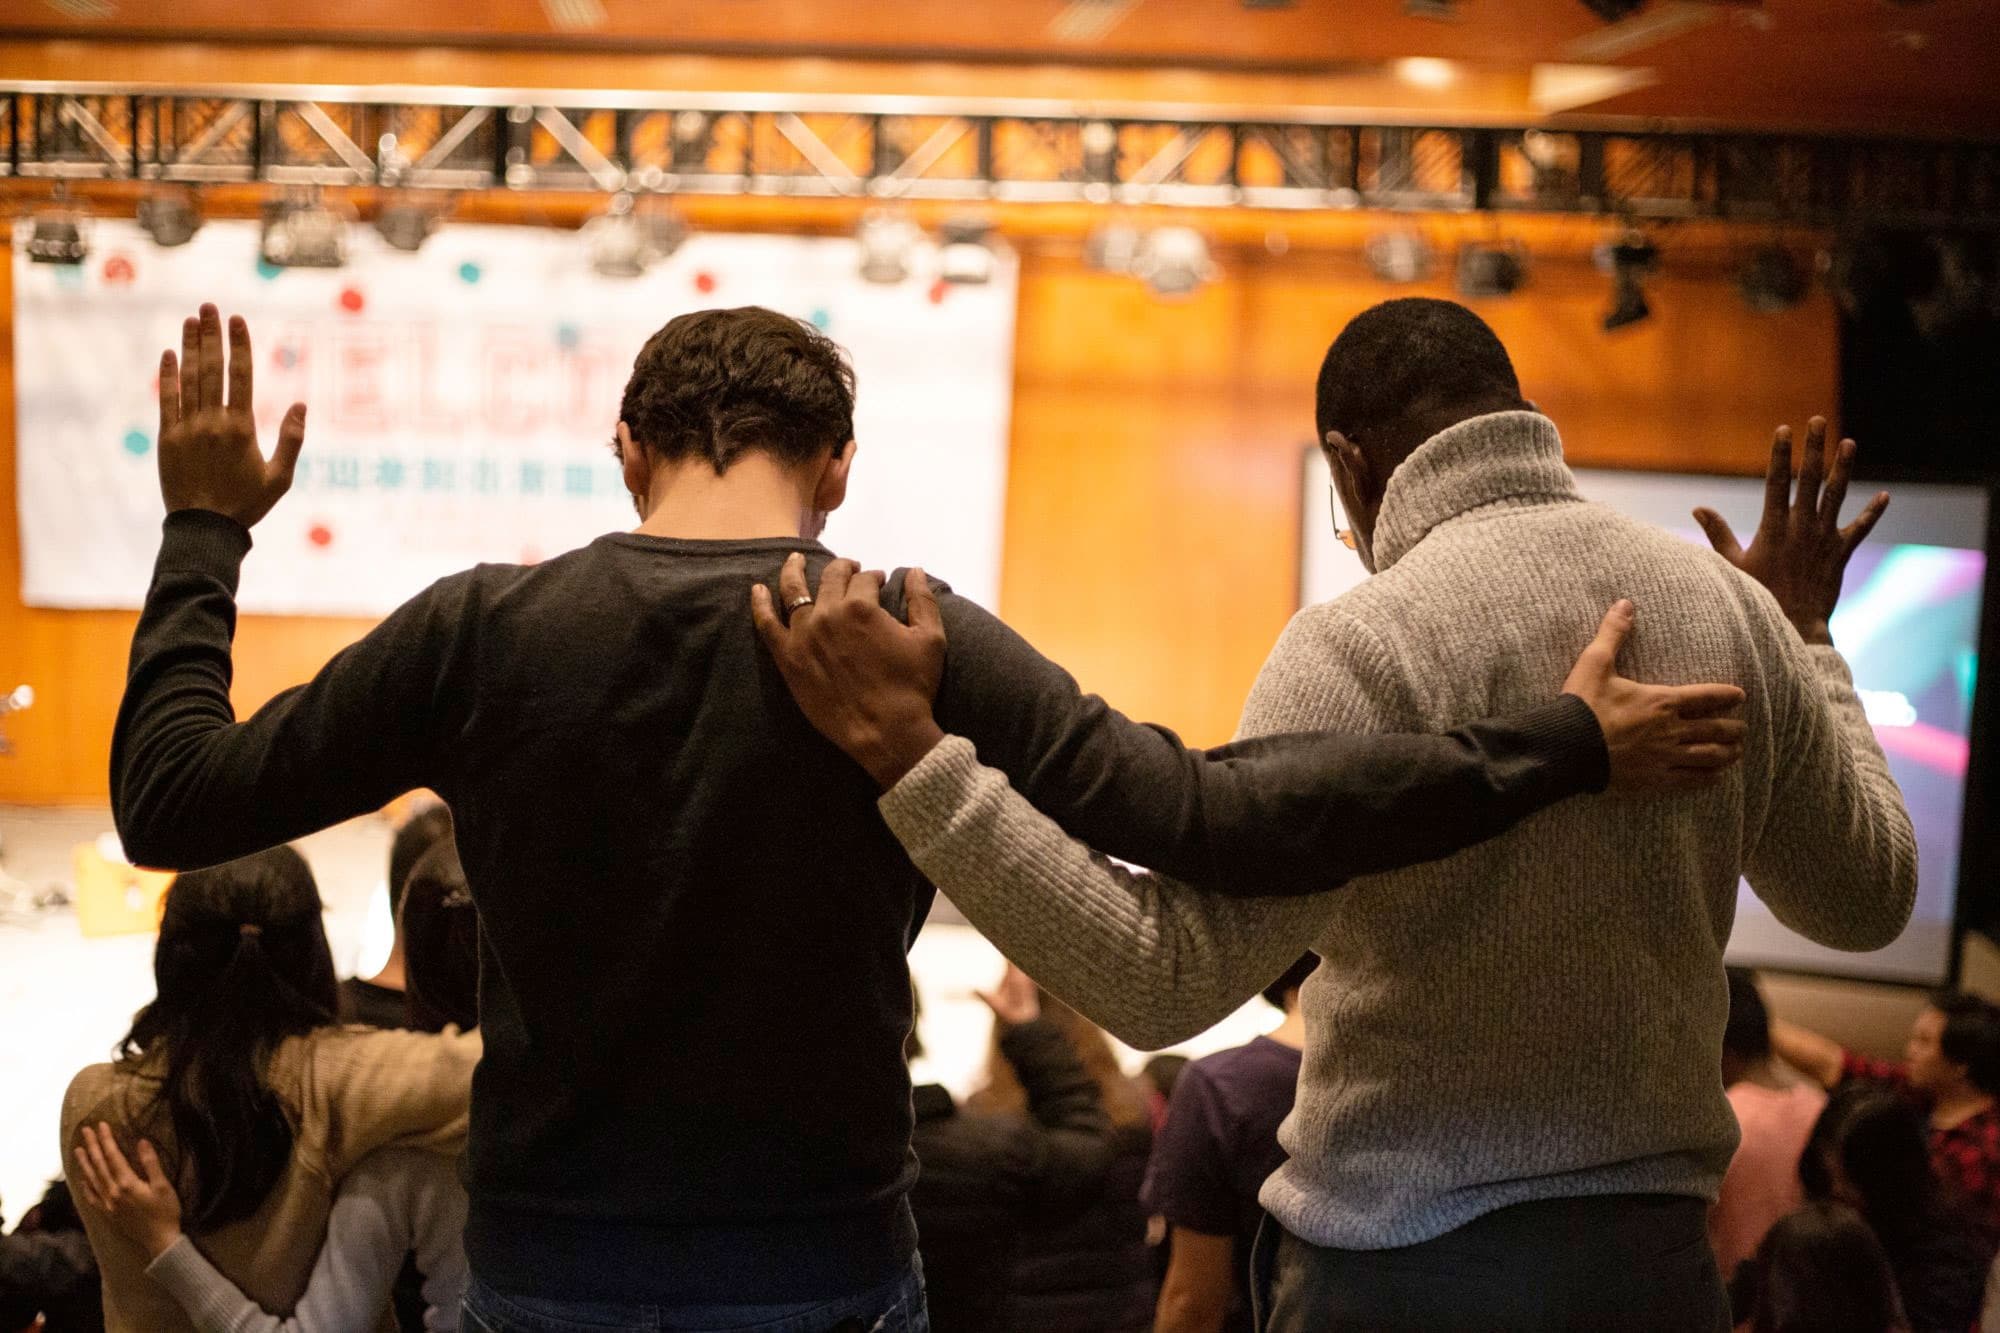 Two men with their arms on each other's shoulders at a church prayer service